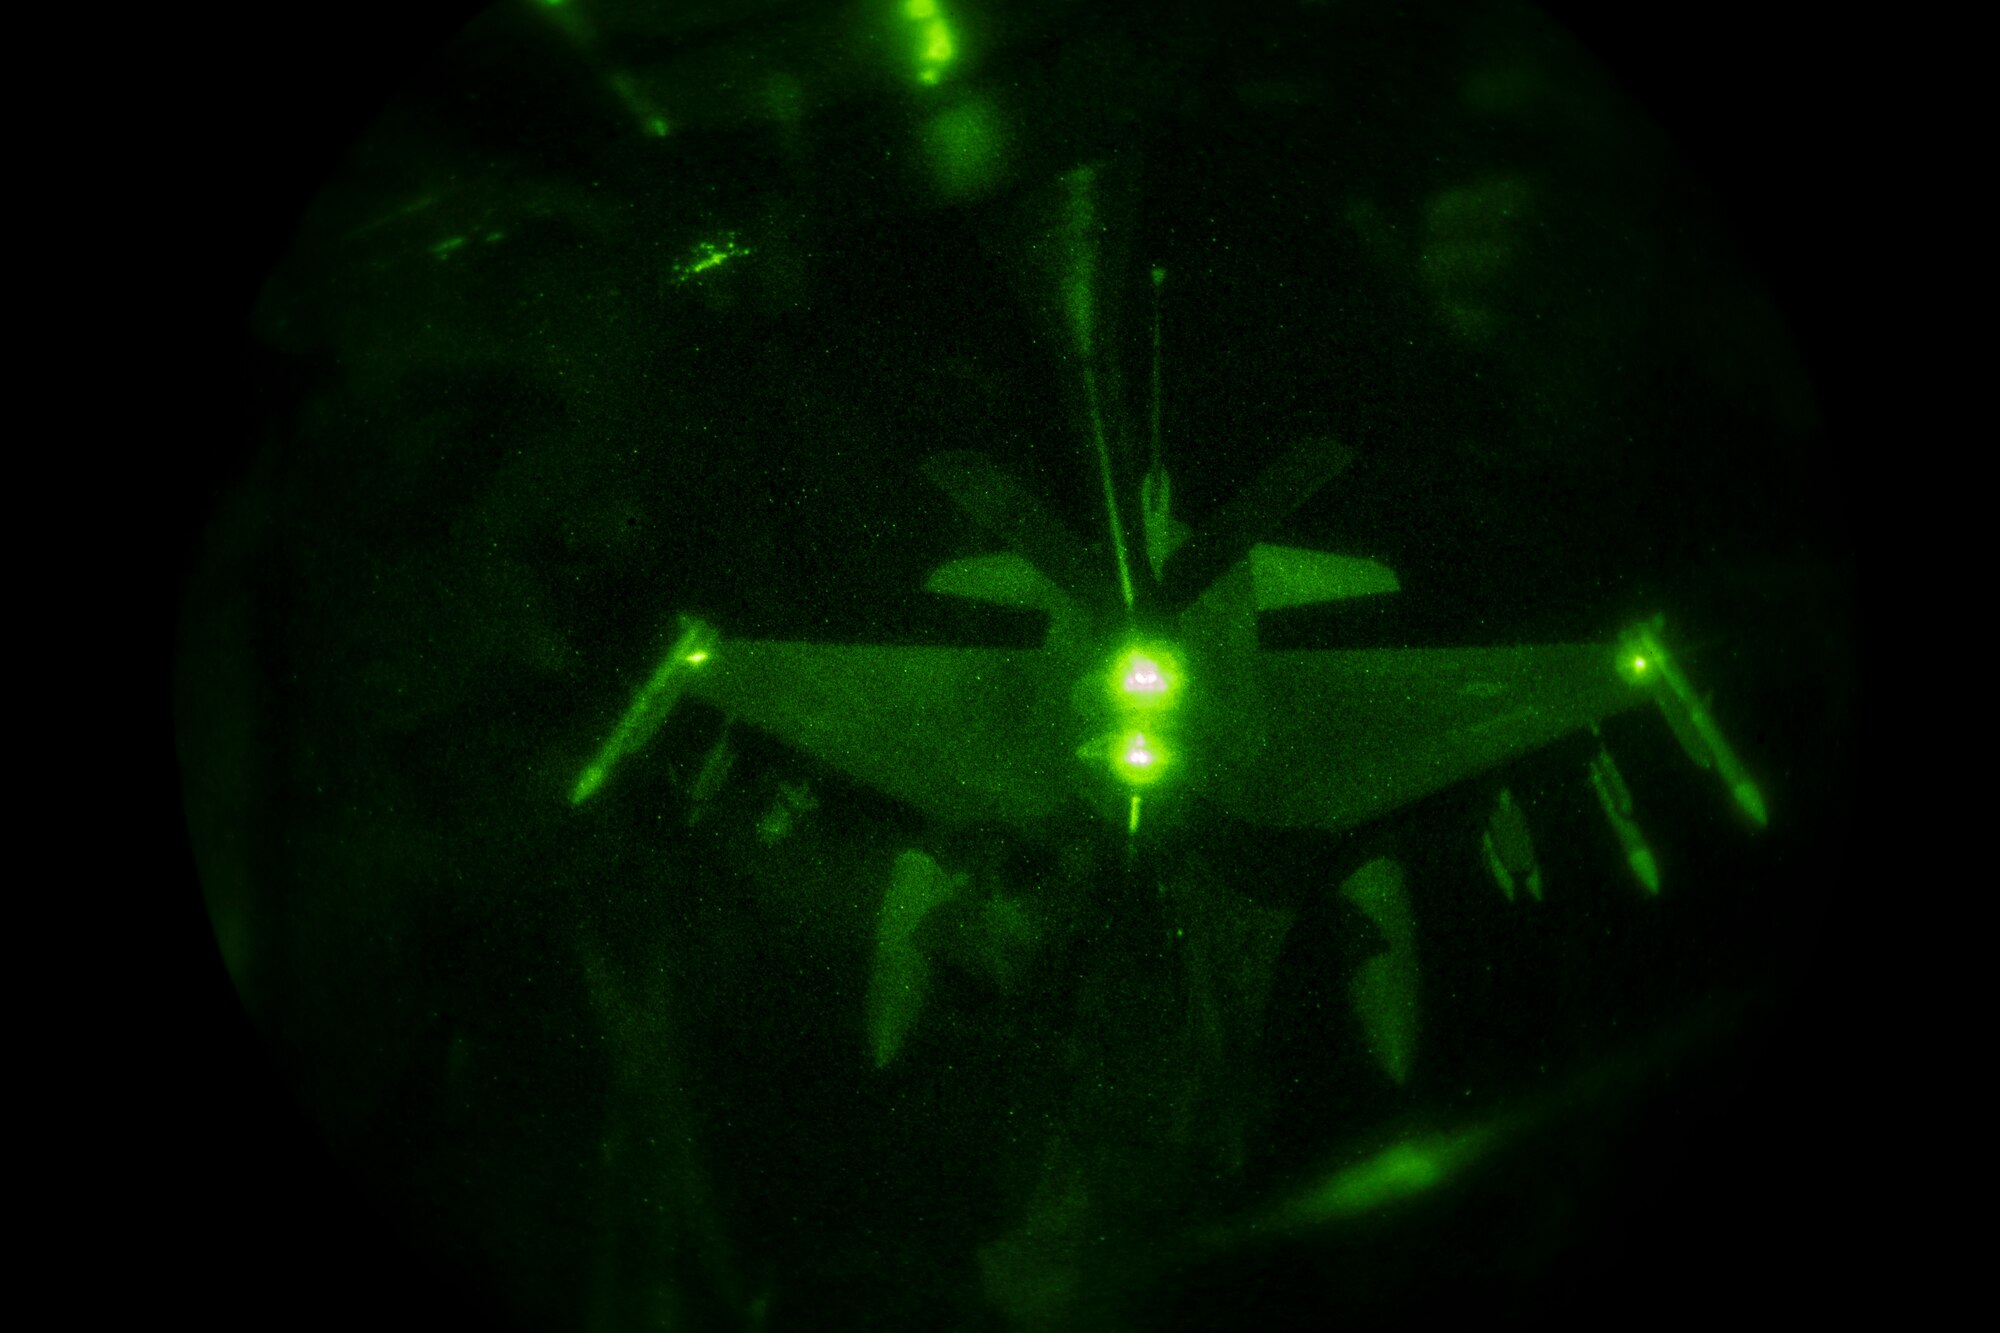 A U.S. Air Force KC-135 boom operator with the 28th Expeditionary Air Refueling Squadron refuels a U.S. Air Force F-16 Fighting Falcon, Nov. 24, 2019, over northern Iraq in support of Inherent Resolve.